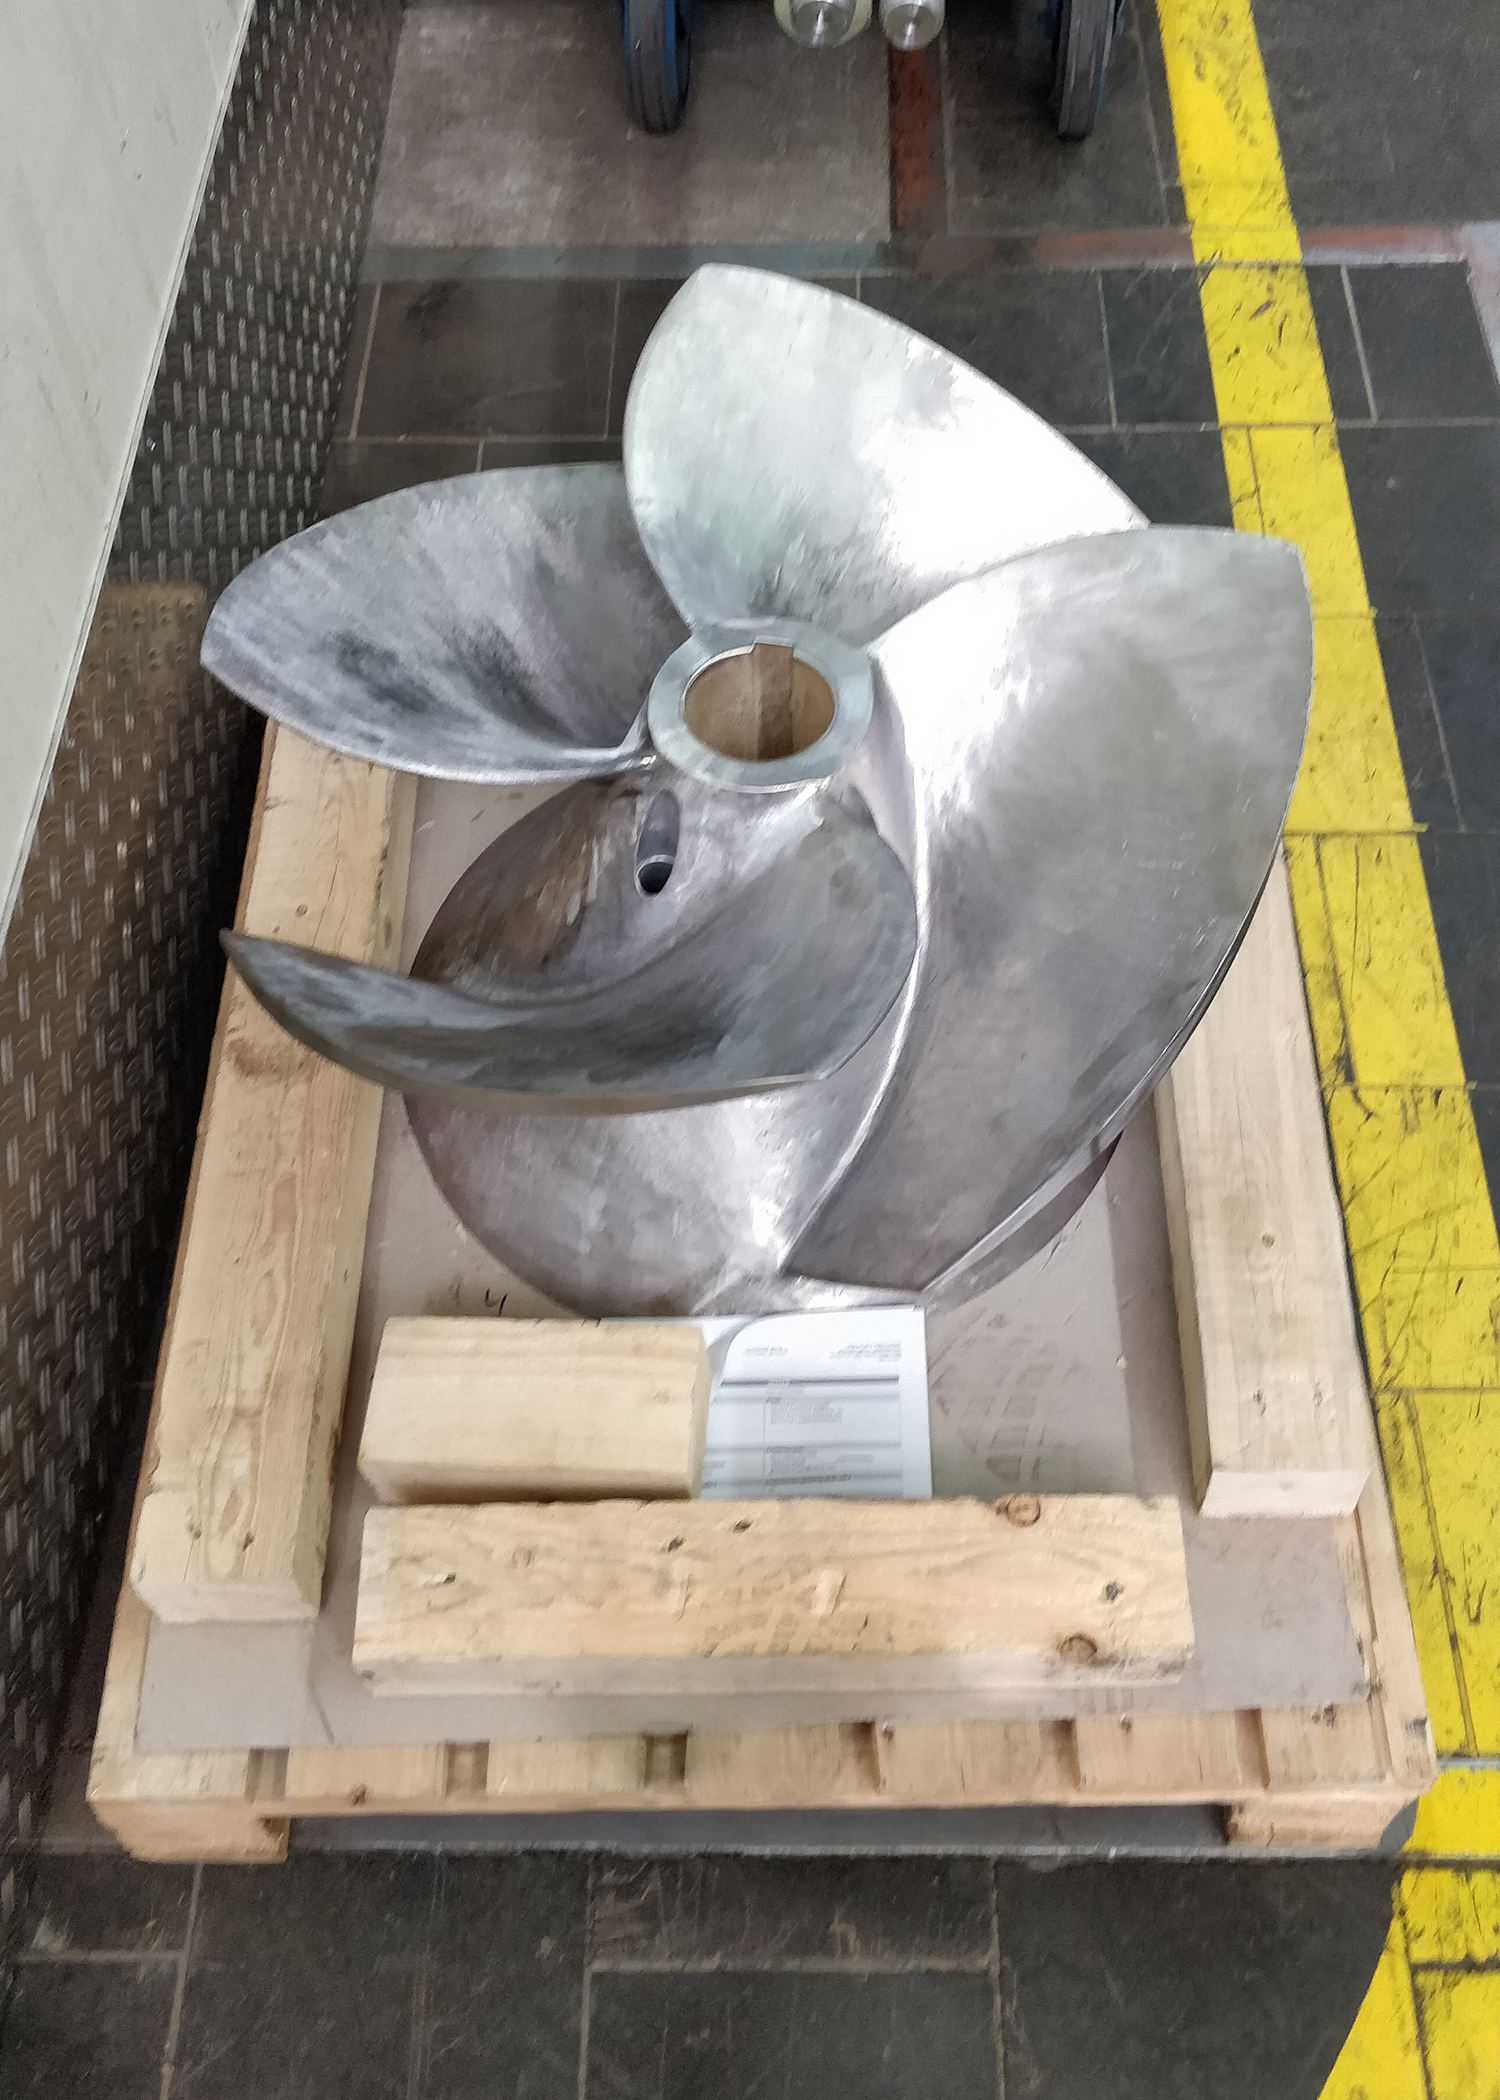 The finished impeller ready to be installed on the new shaft